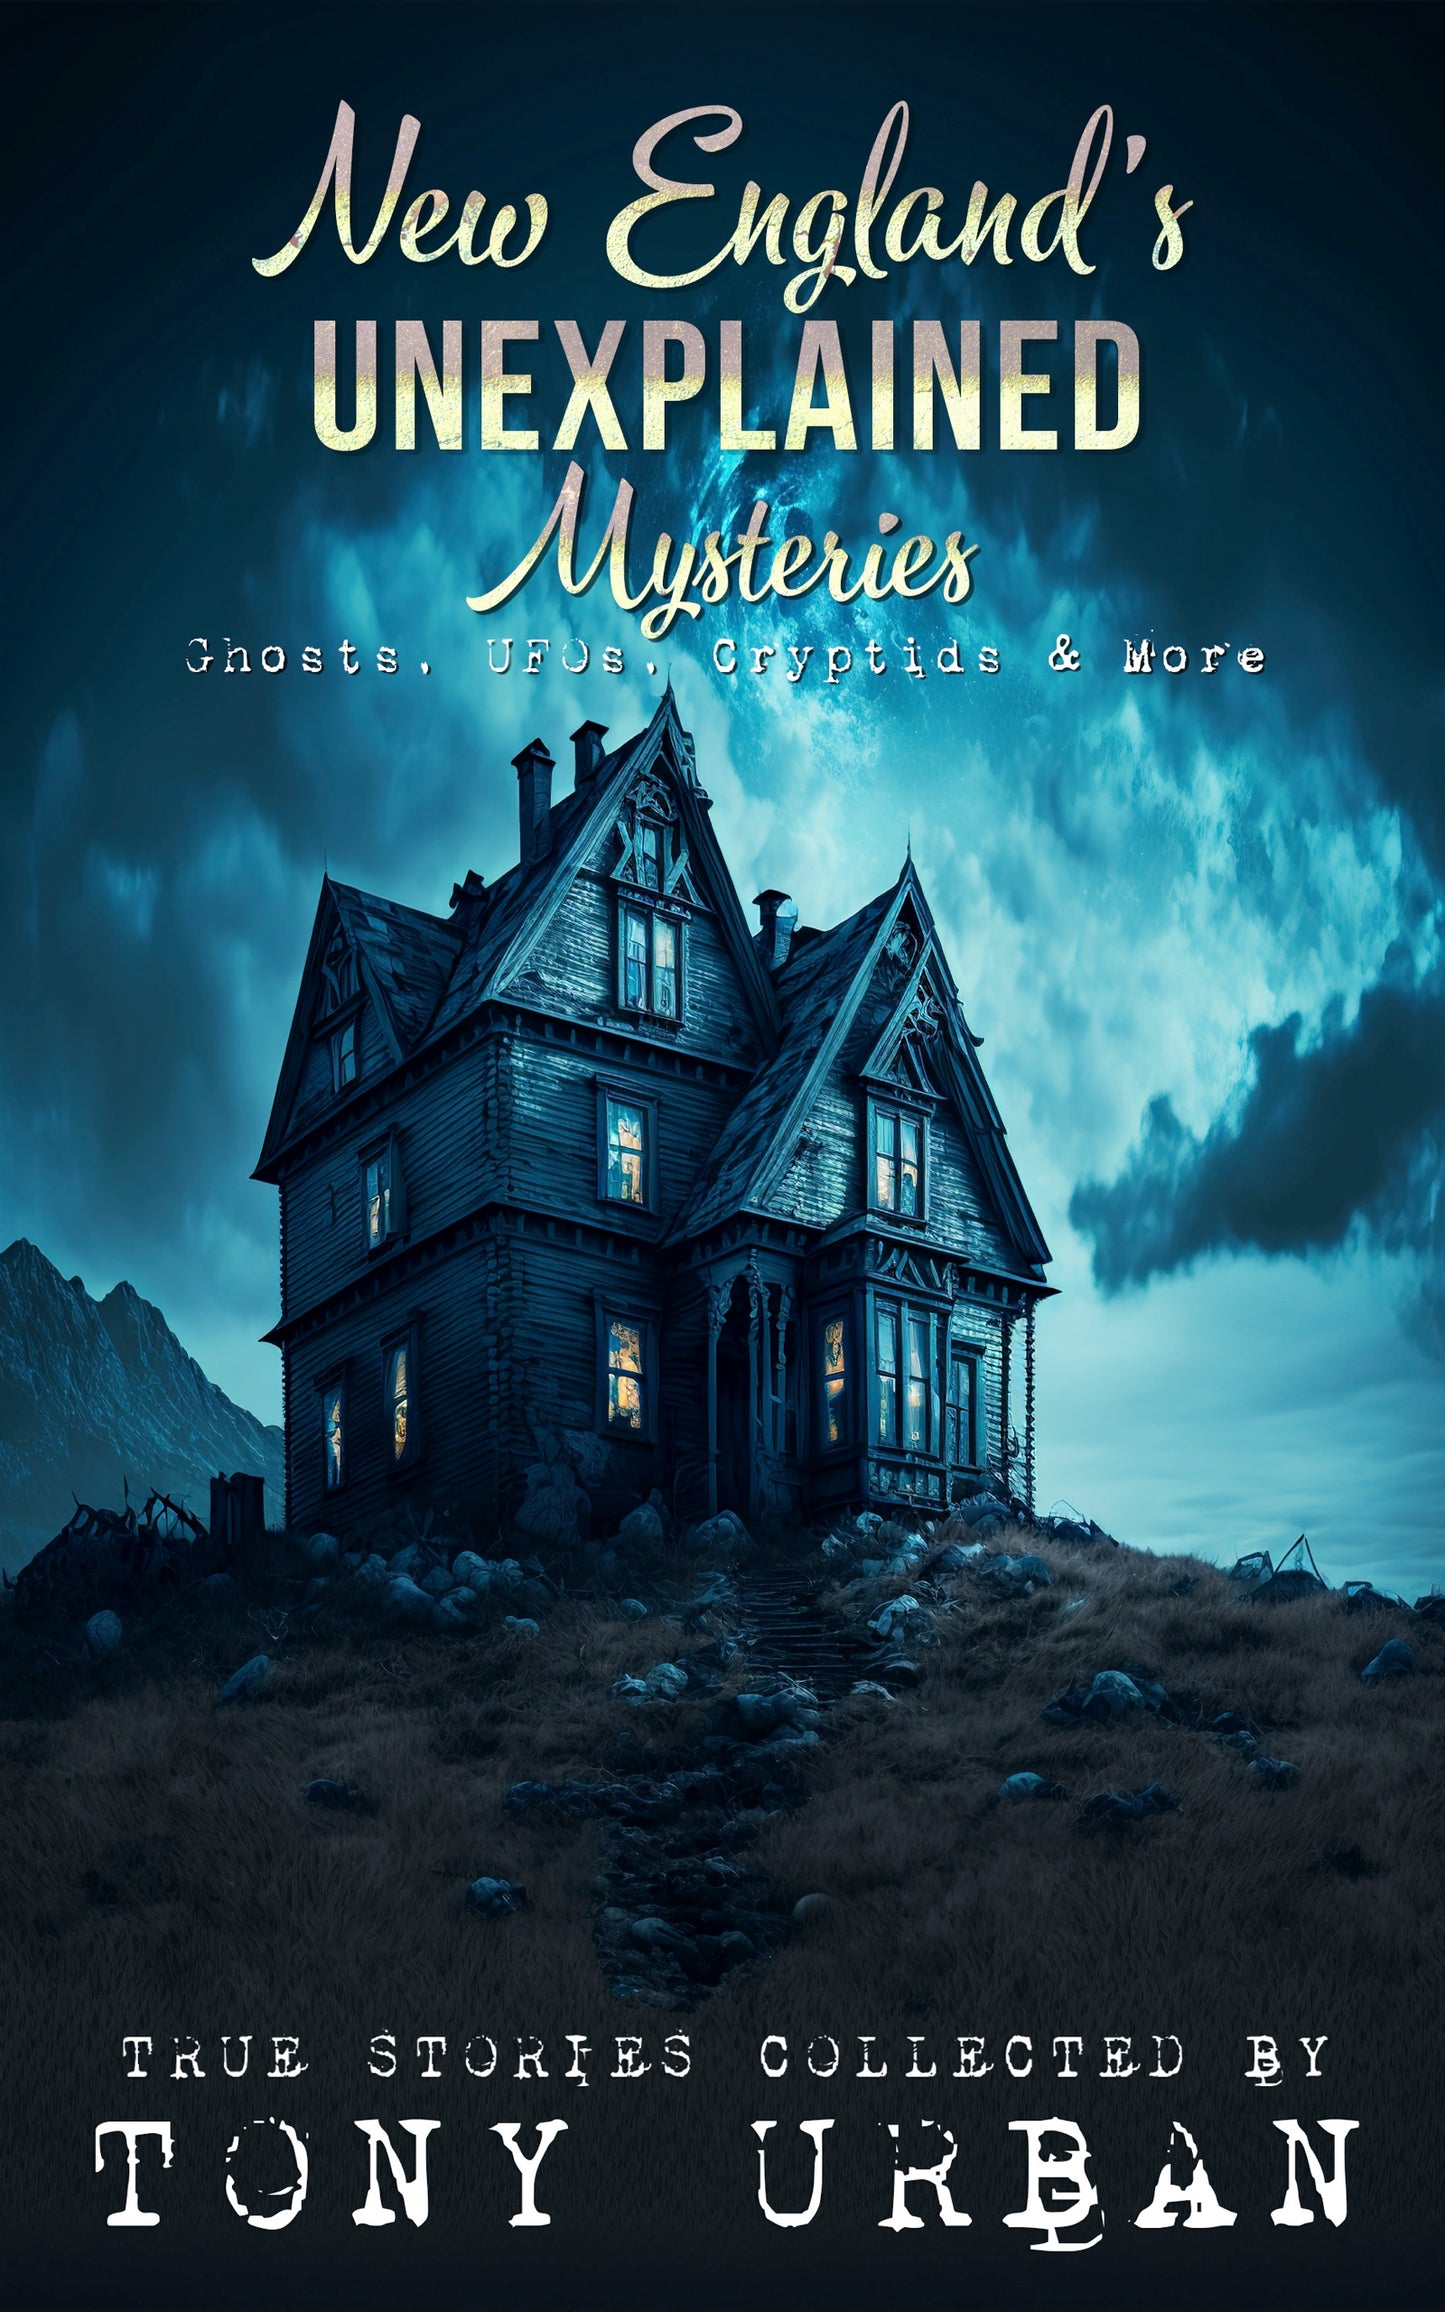 New England's Unexplained Mysteries - signed paperback